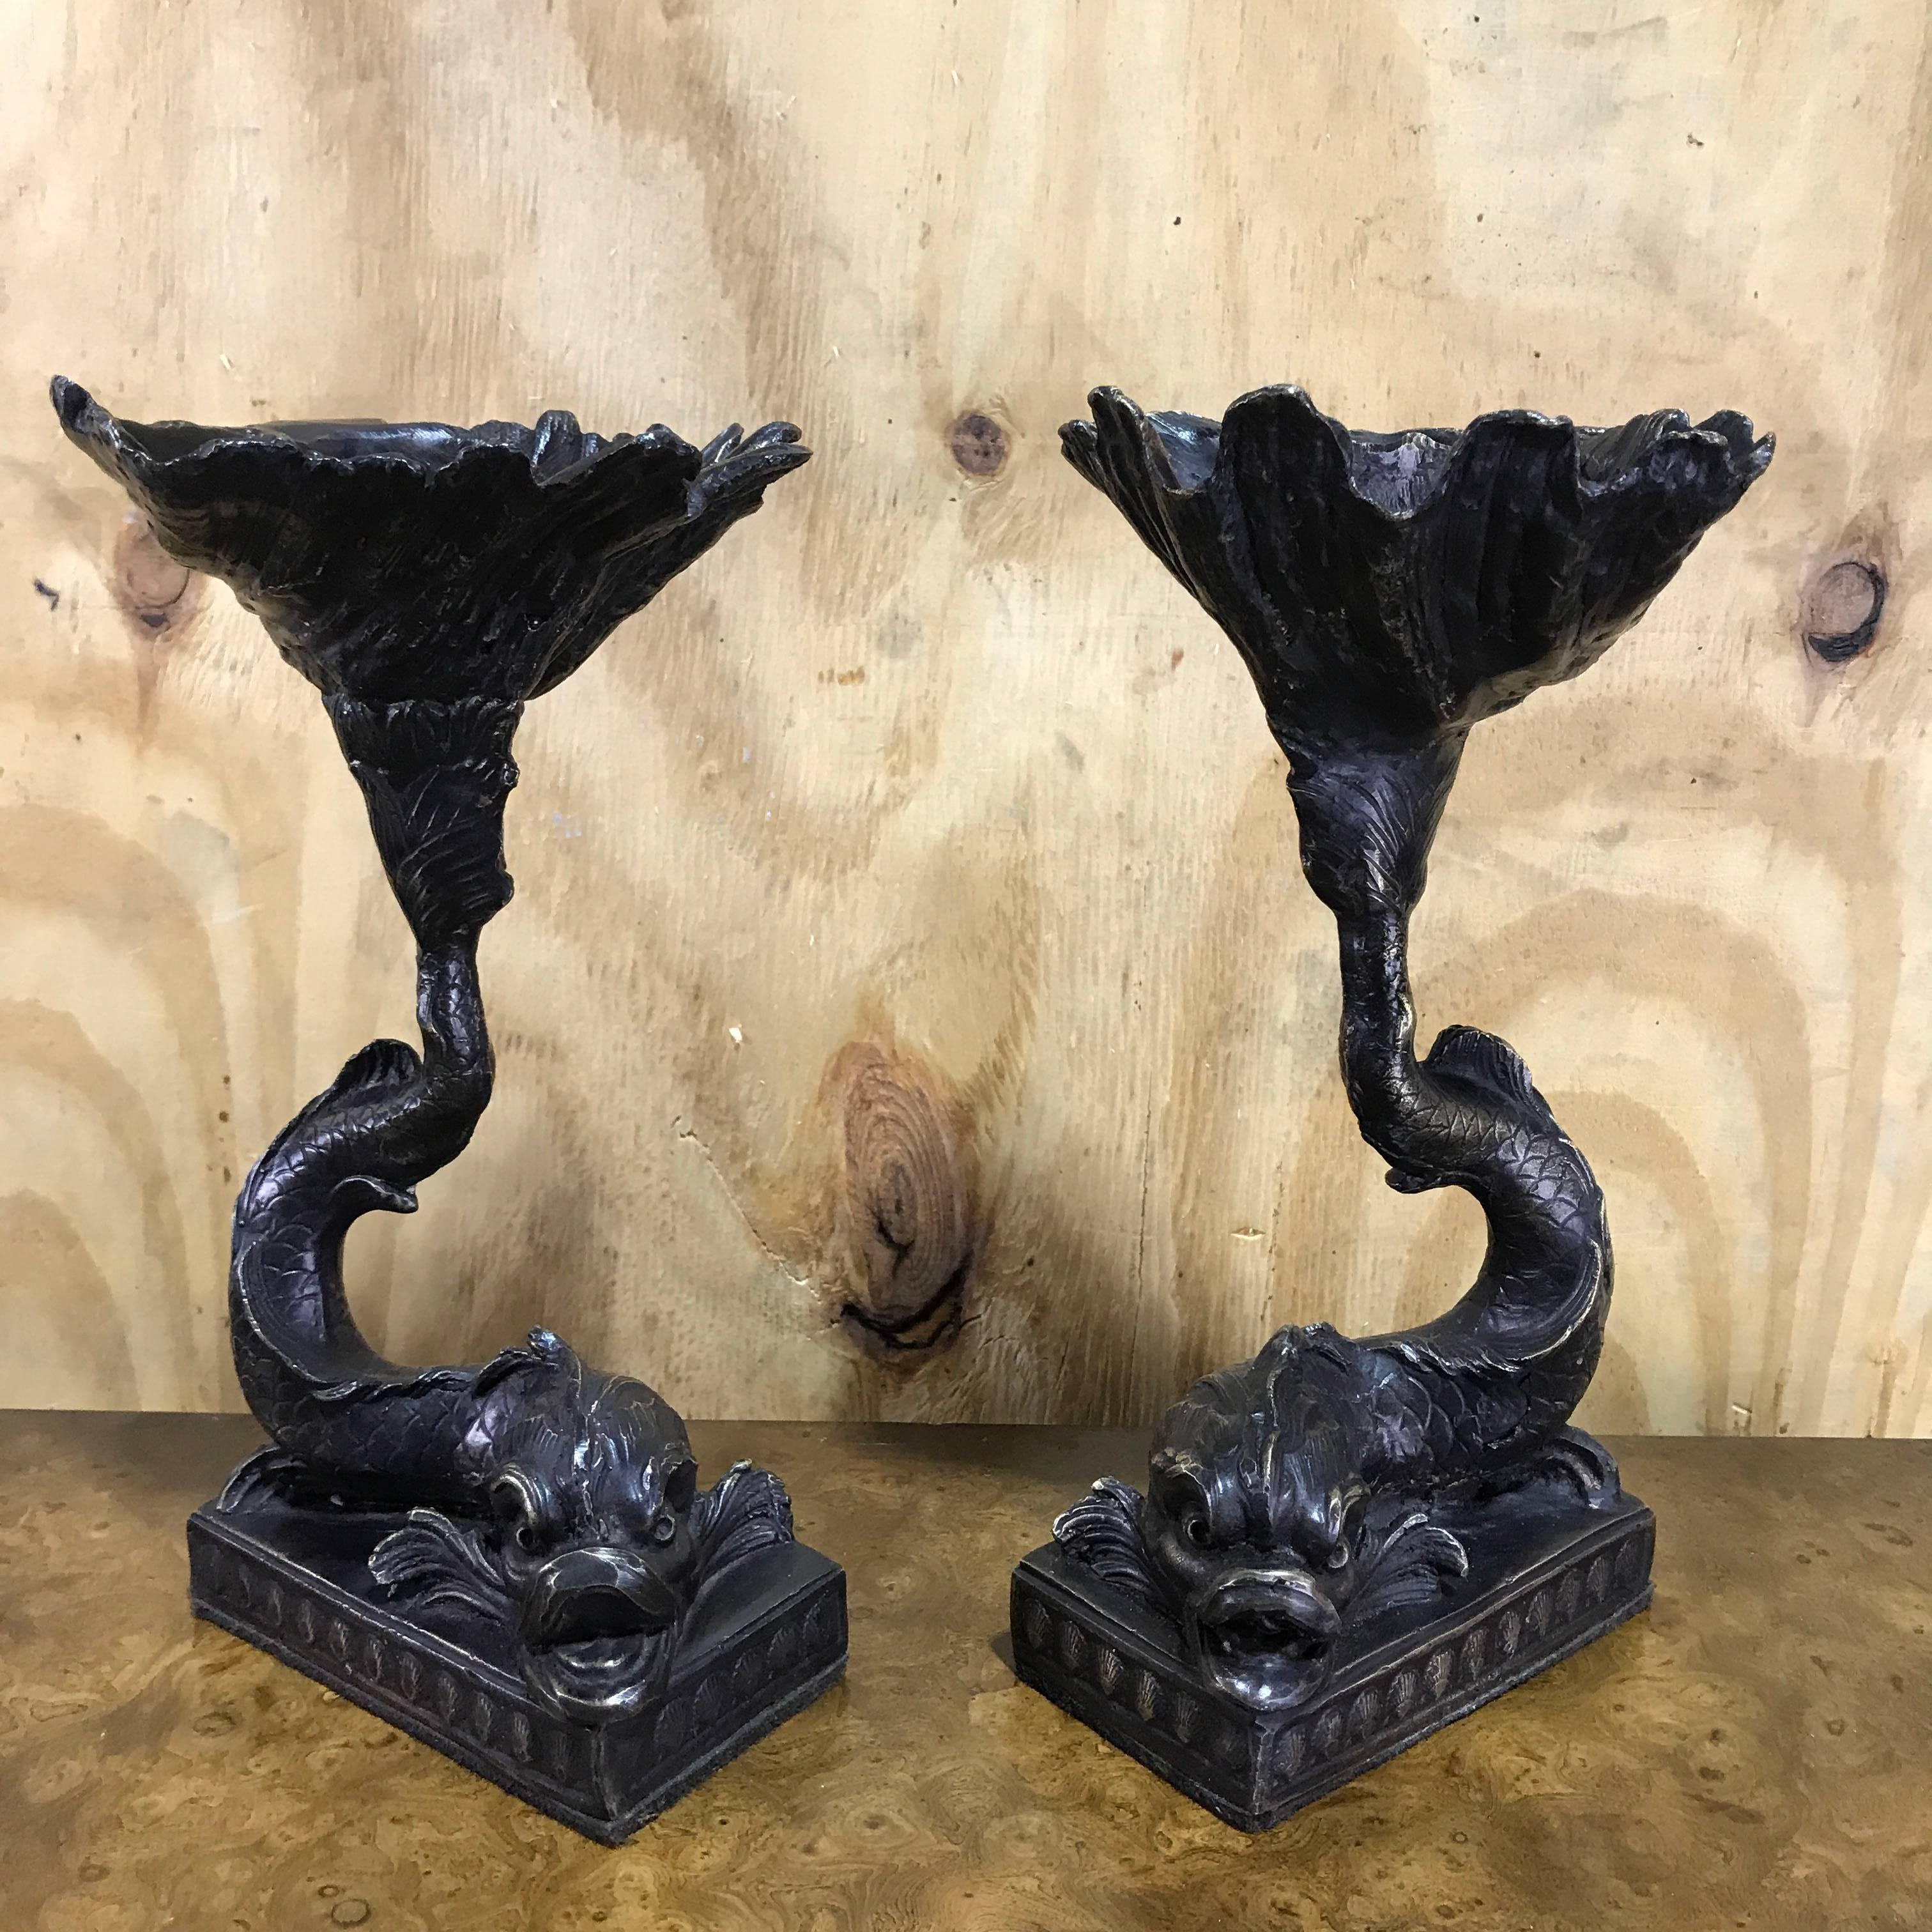 Pair of Italian bronze dolphin and shell motif tazza, each one realistically cast with tails supporting a clam shell tazza.
The base measurers 3.5